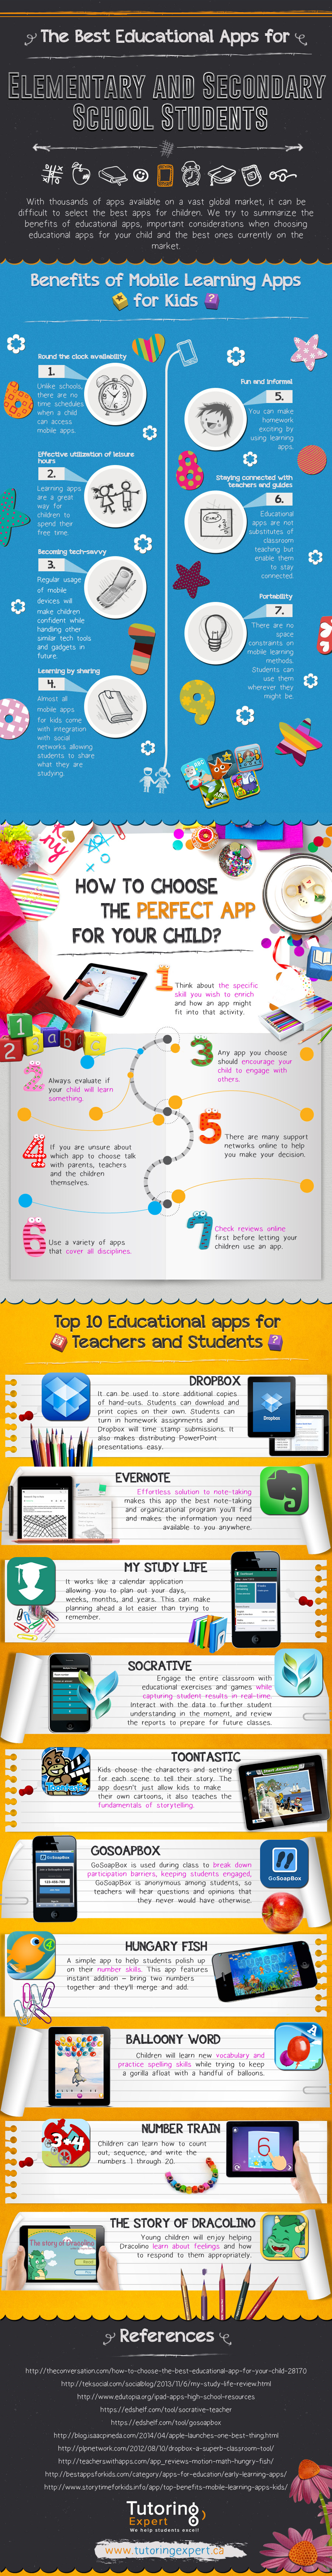 The Best Apps for Elementary & Secondary School Students